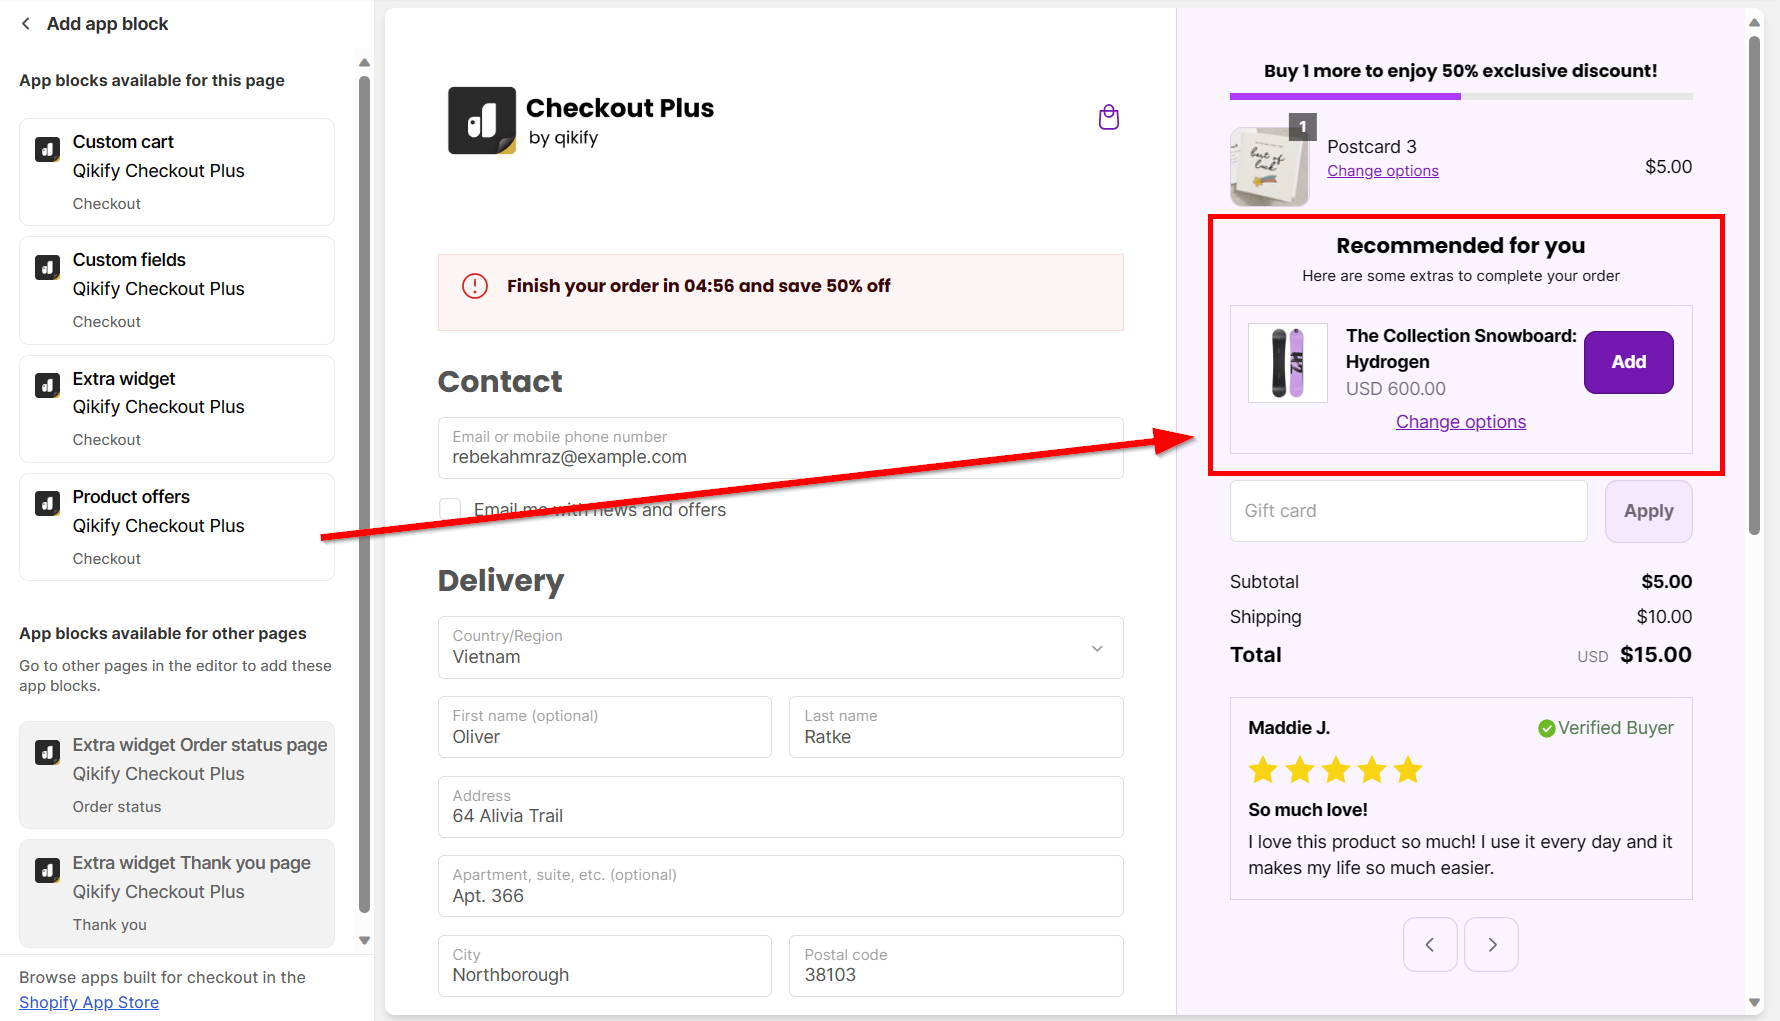 add reviews for testimonials extension in checkout page - shopify checkout customization app